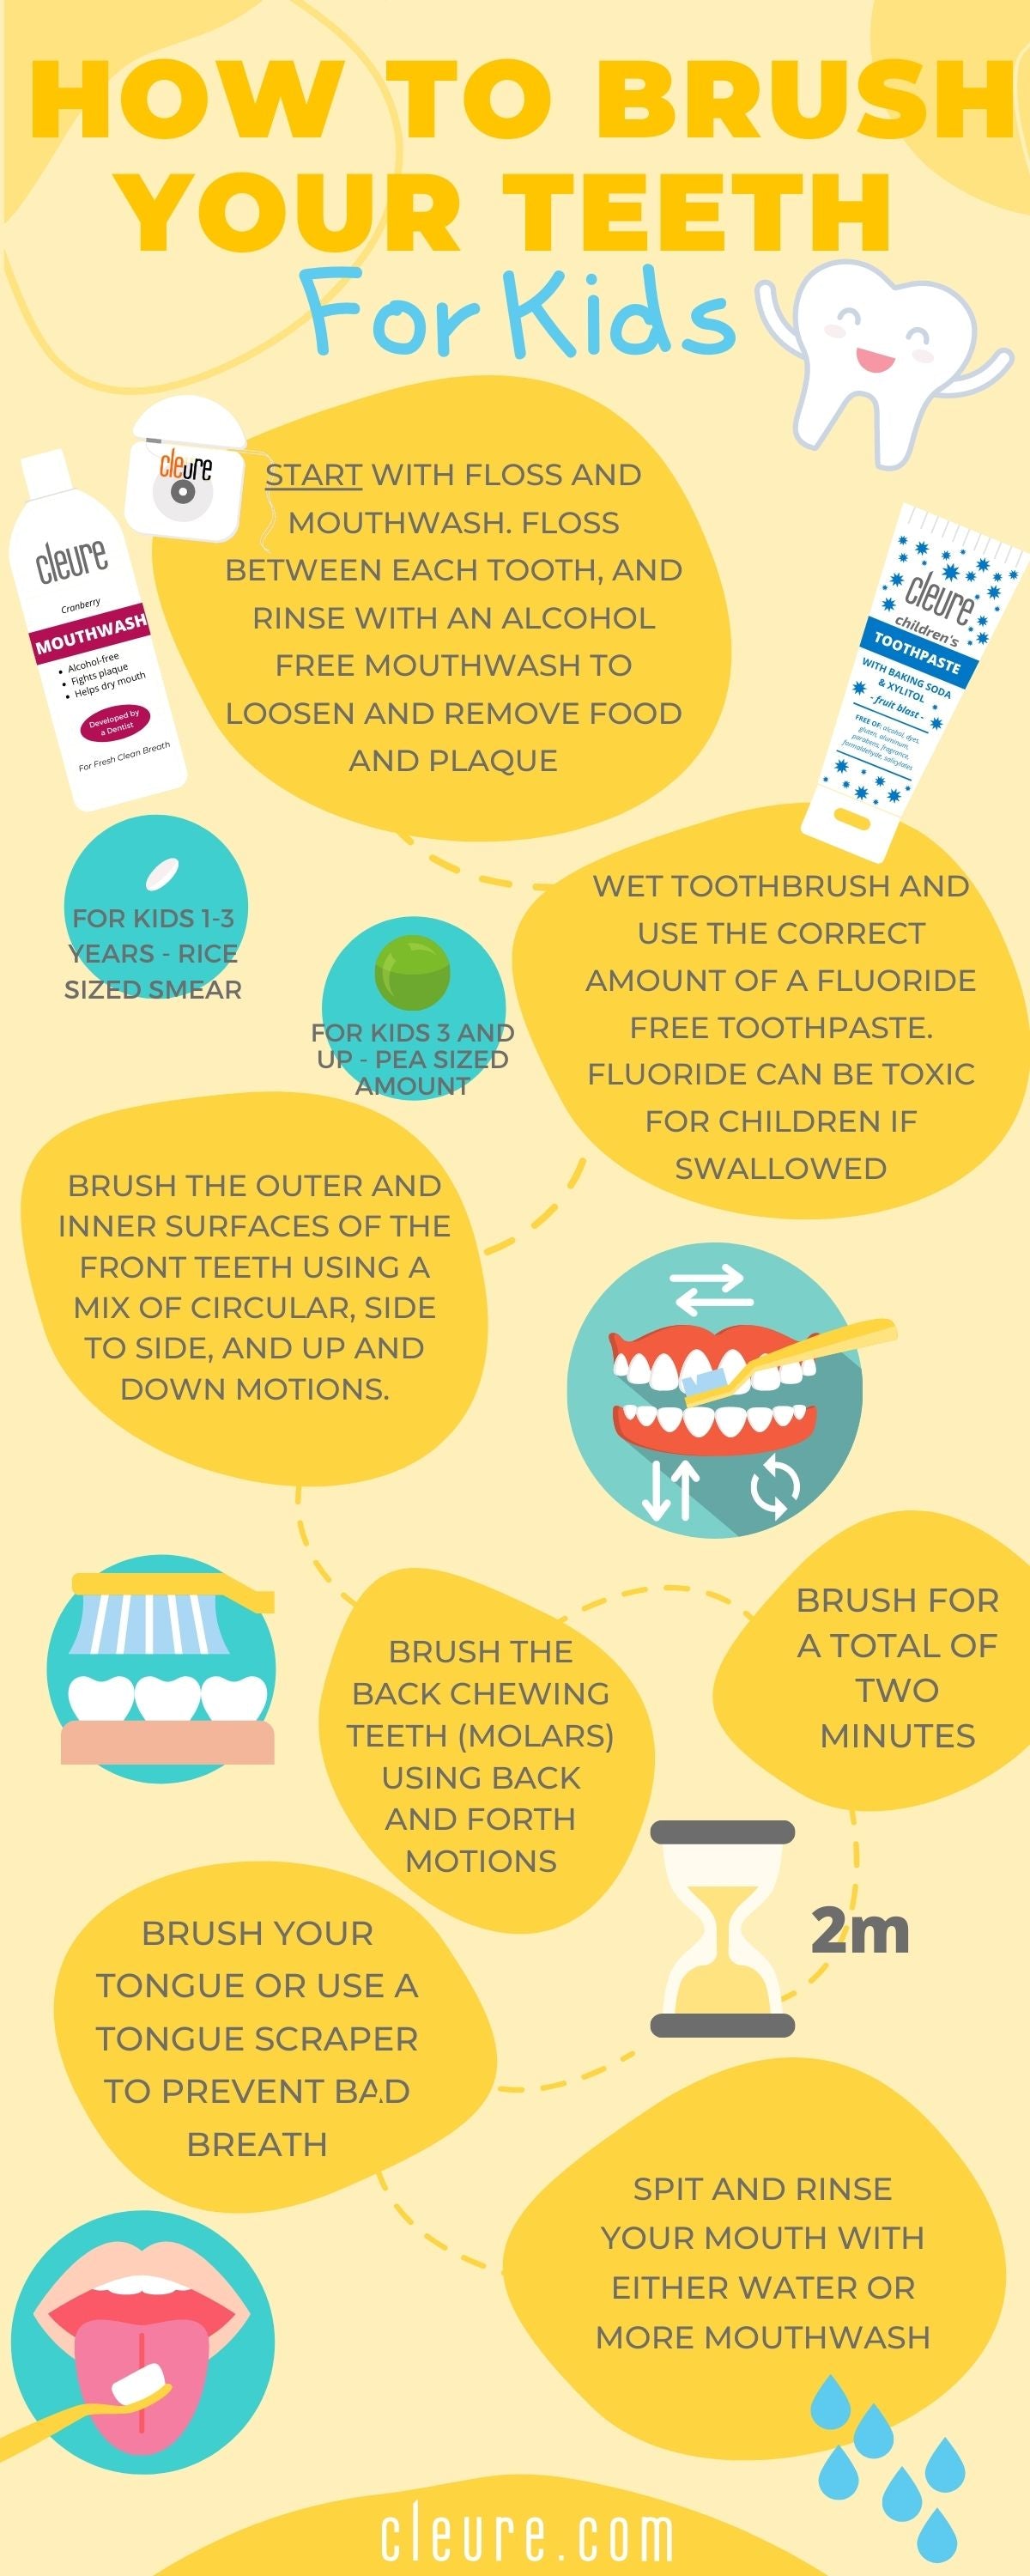 how to brush teeth for kids infographic - cleure